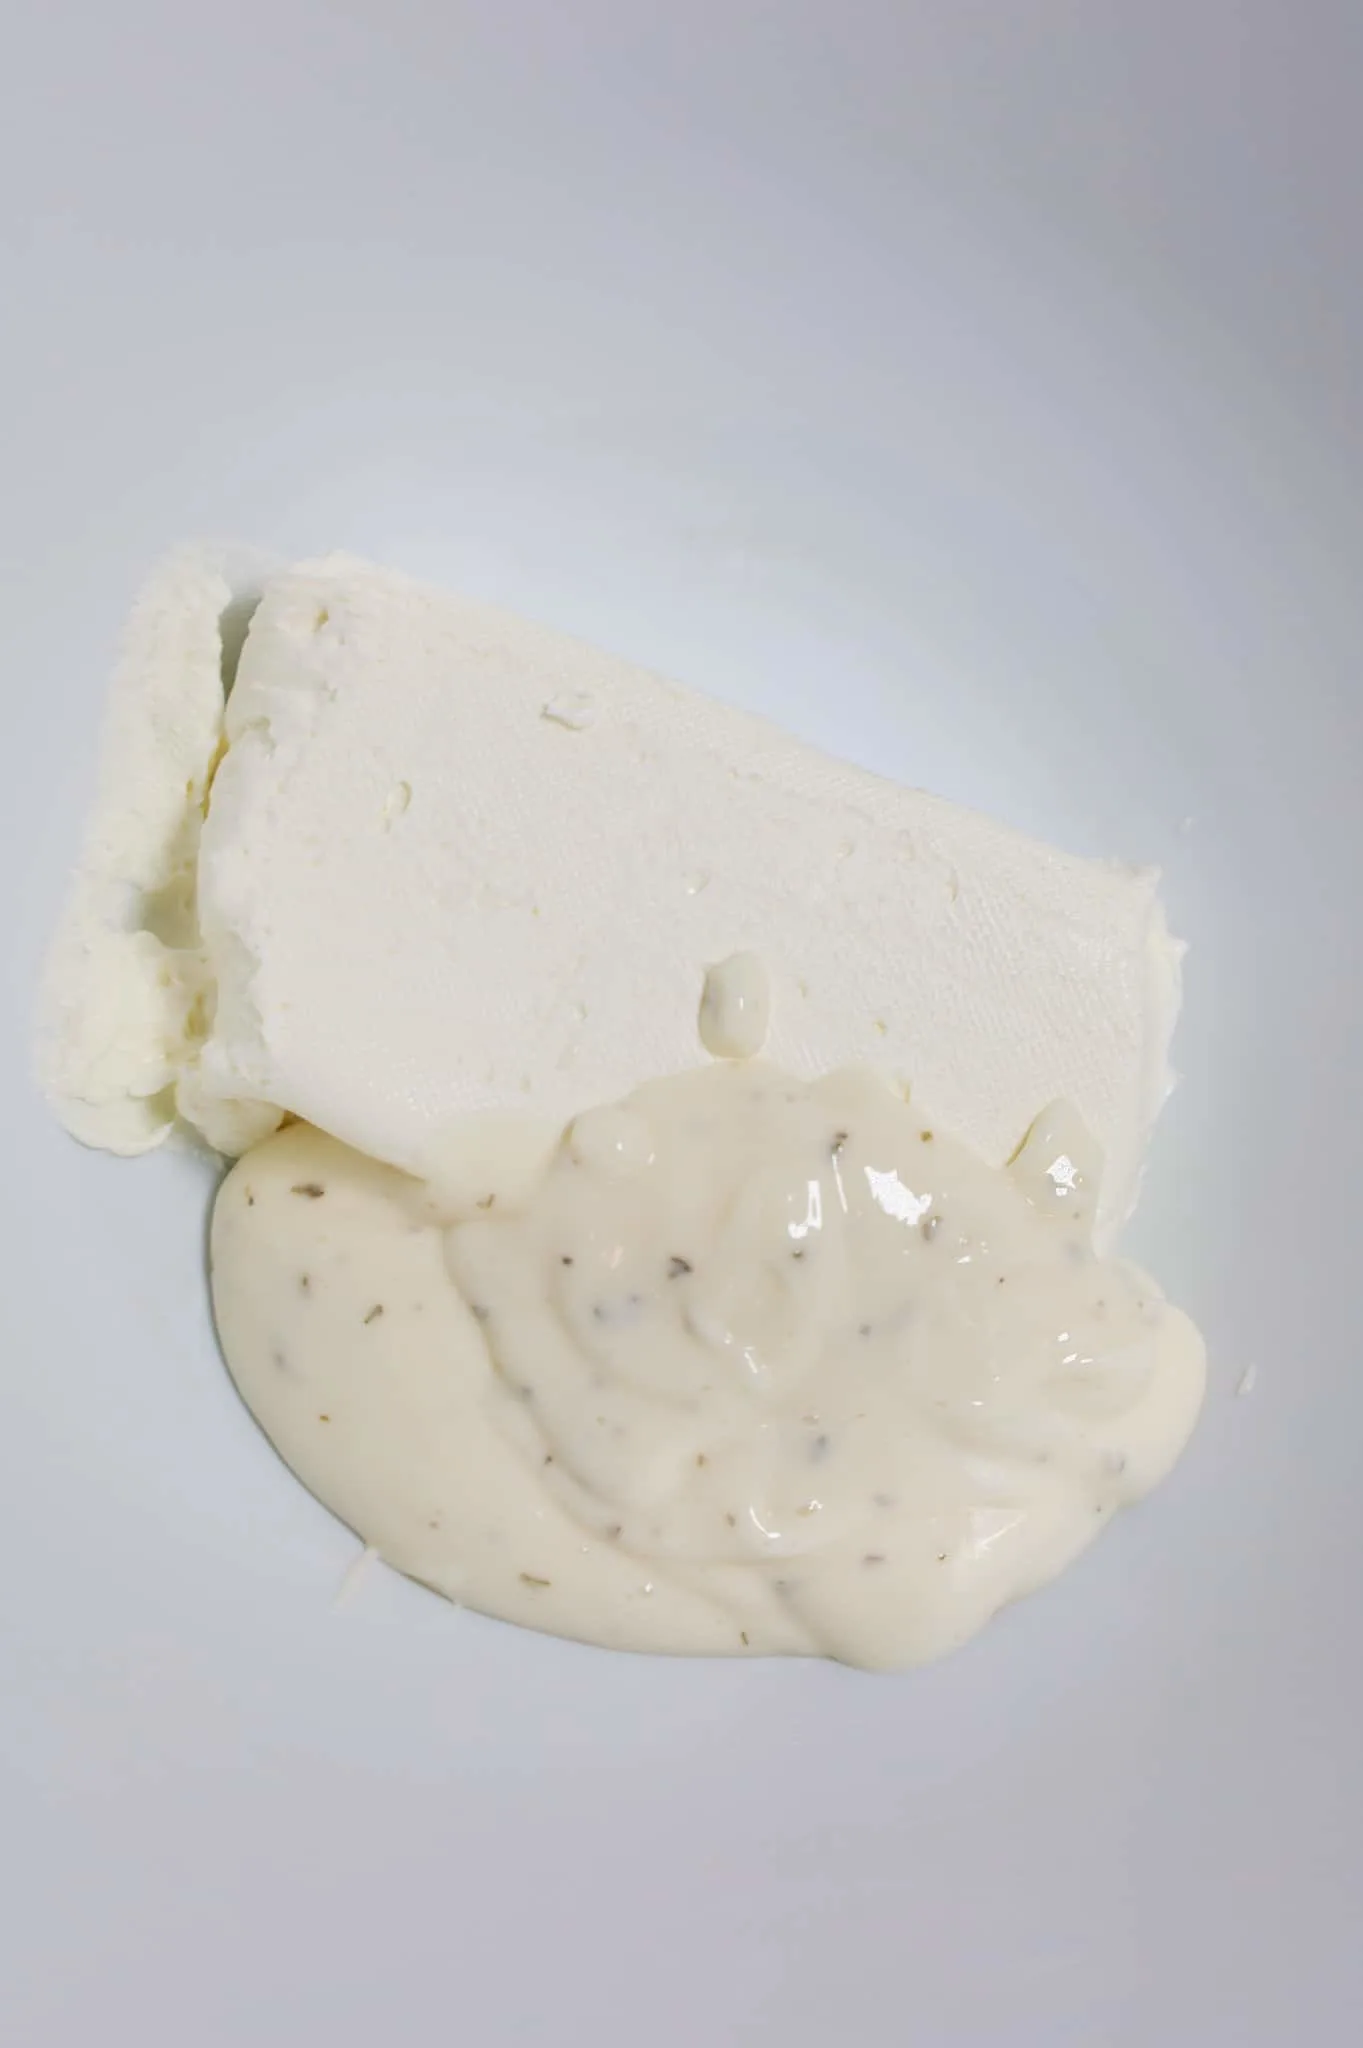 softened cream cheese and ranch dressing in a mixing bowl